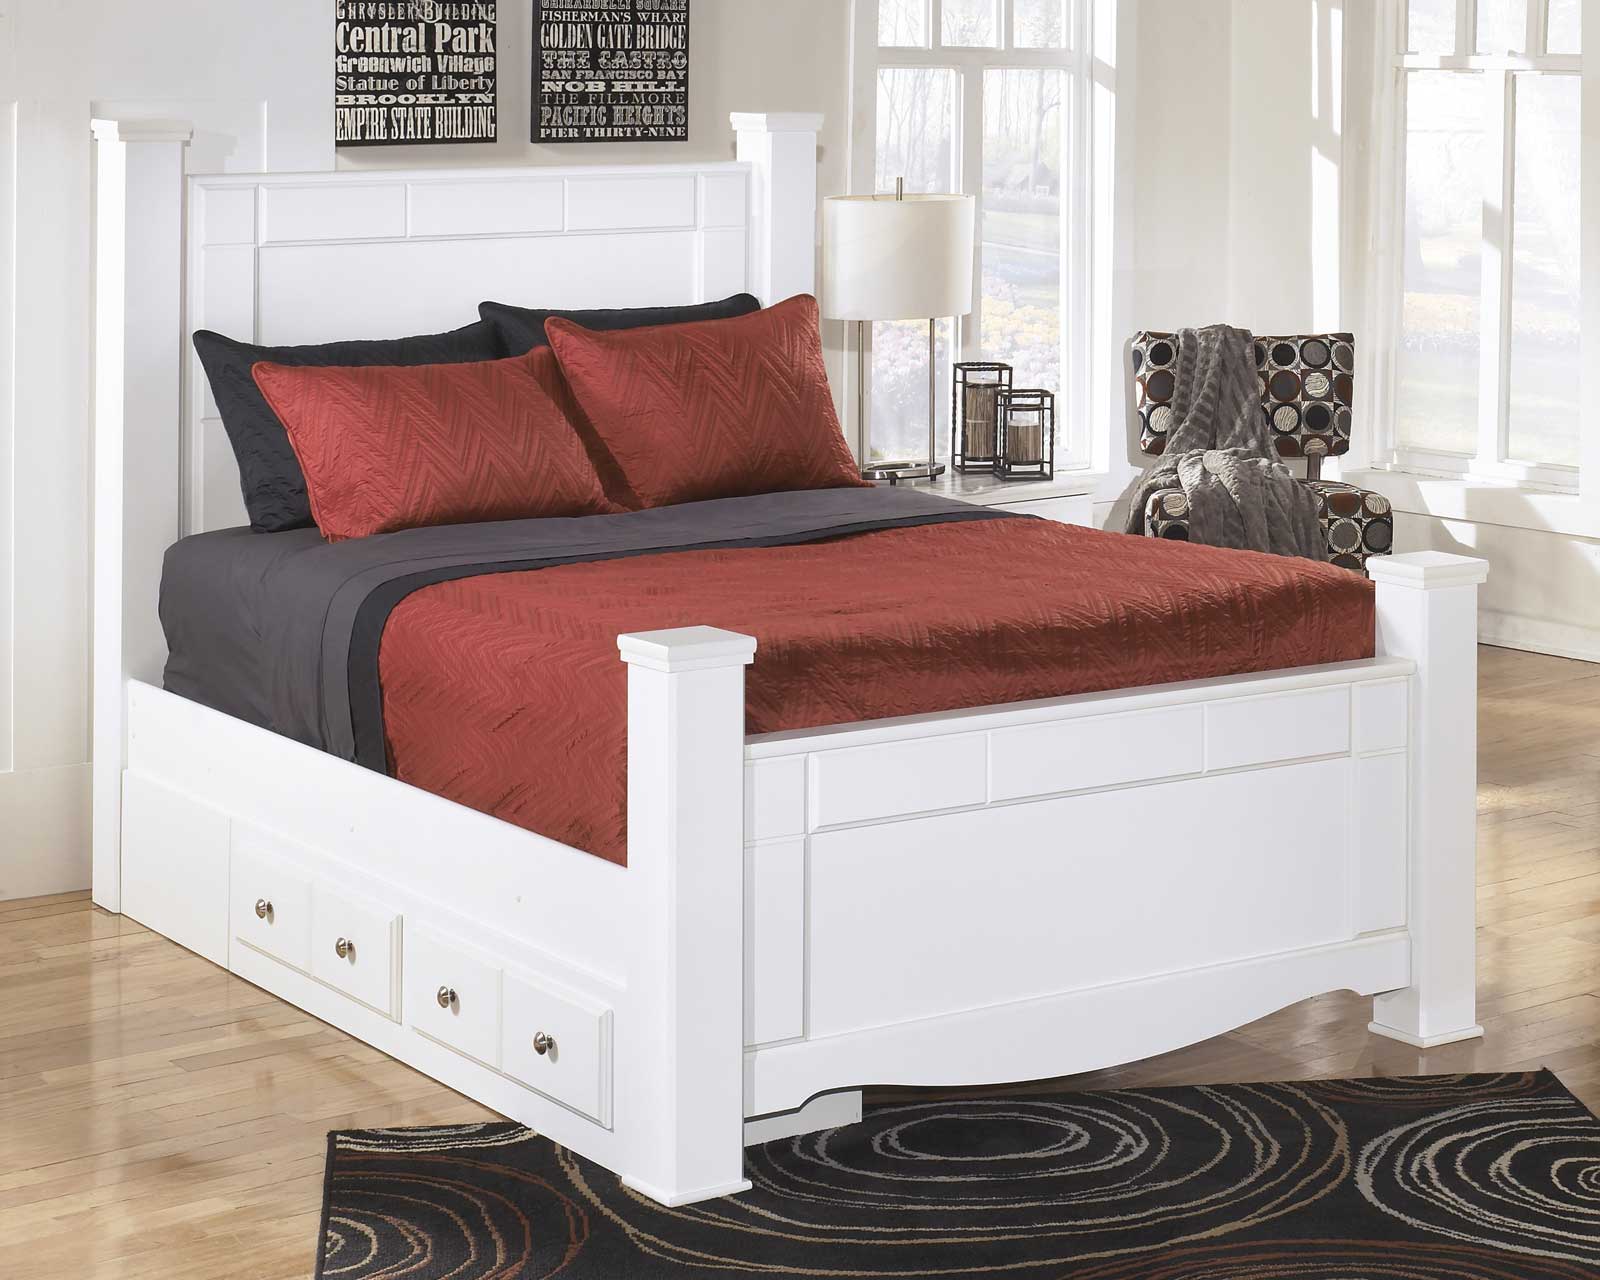 White Red Bedroom Personable White Red Themed King Bedroom Sets With Under Bed Storage Design Ideas And Adorable Bed Linen Design Also Elegant White Bedroom Storage Ideas Plus Heavenly White Wall Paints Colors Bedroom Enhance The King Bedroom Sets: The Soft Vineyard-6